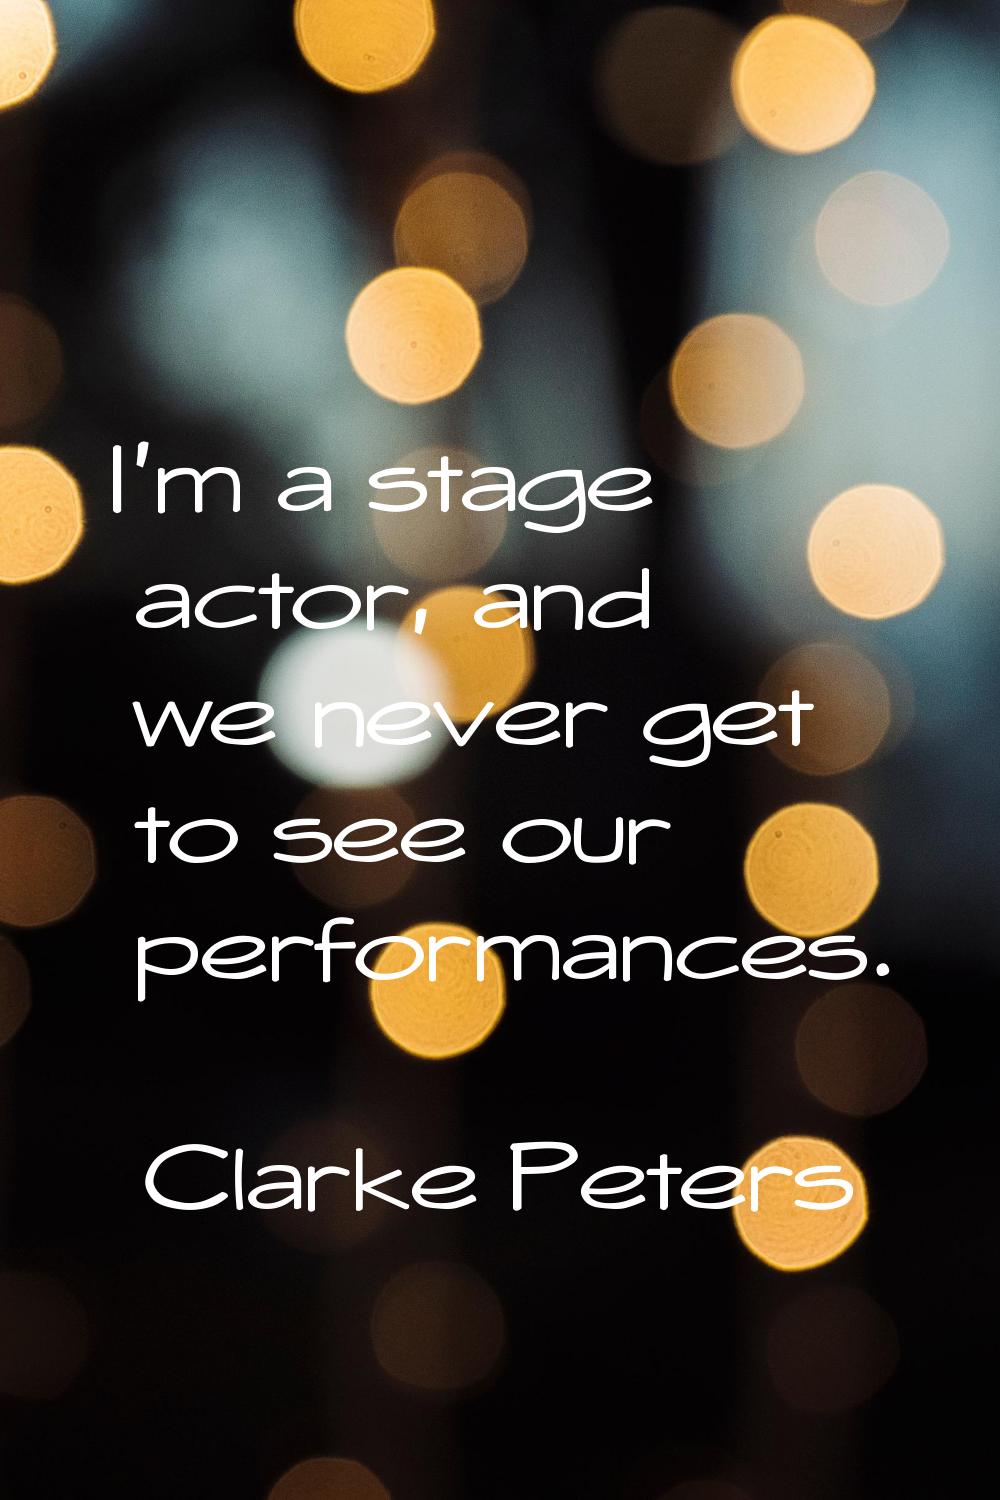 I'm a stage actor, and we never get to see our performances.